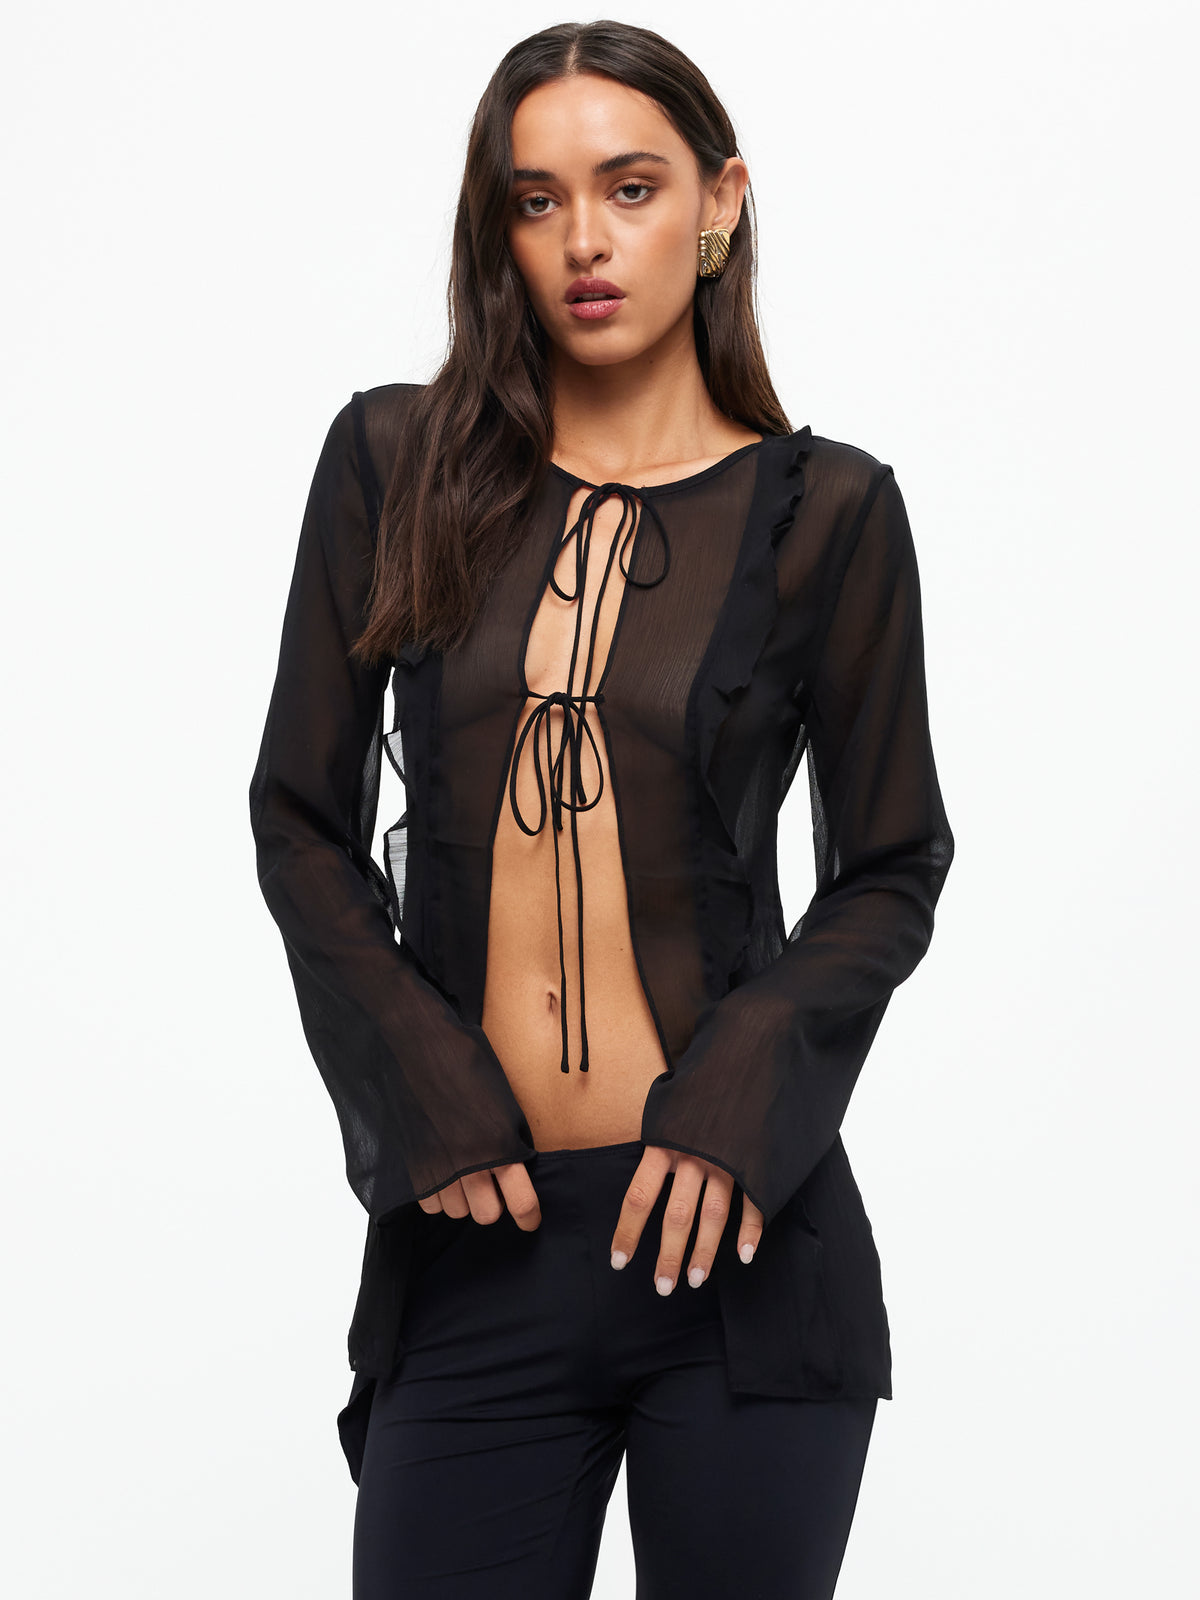 Barely There Tie Top in Onyx